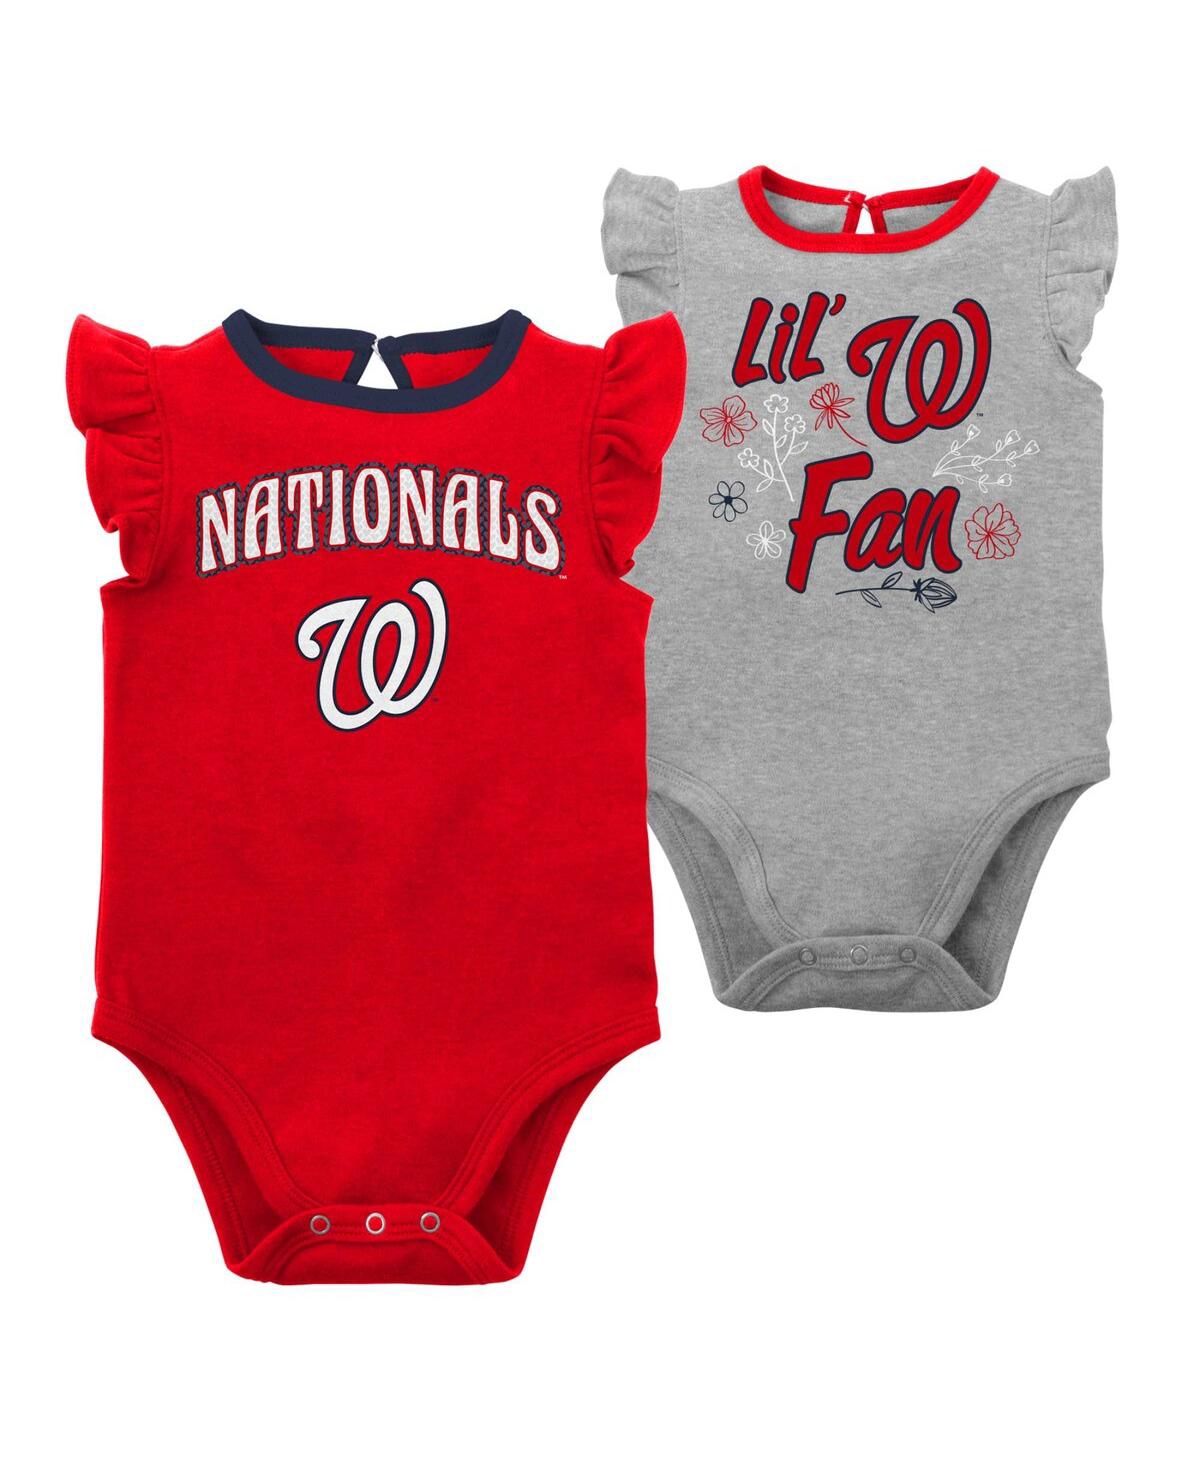 OUTERSTUFF NEWBORN AND INFANT BOYS AND GIRLS RED, HEATHER GRAY WASHINGTON NATIONALS LITTLE FAN TWO-PACK BODYSUI